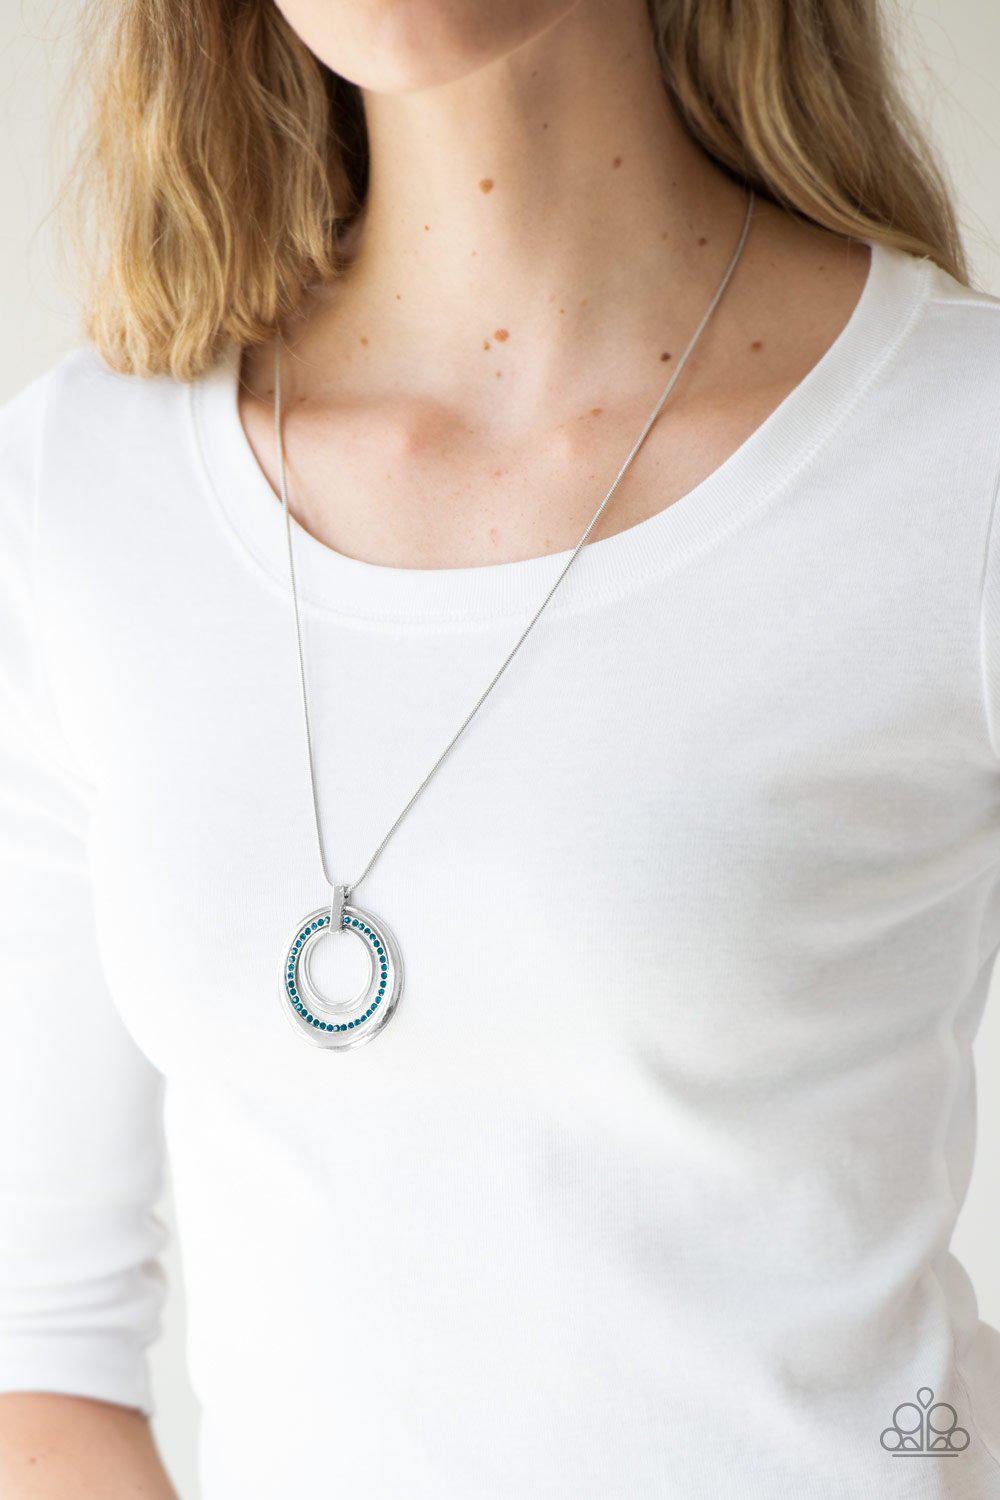 Gather Around Gorgeous Blue and Silver Pendant Necklace - Paparazzi Accessories- model - CarasShop.com - $5 Jewelry by Cara Jewels